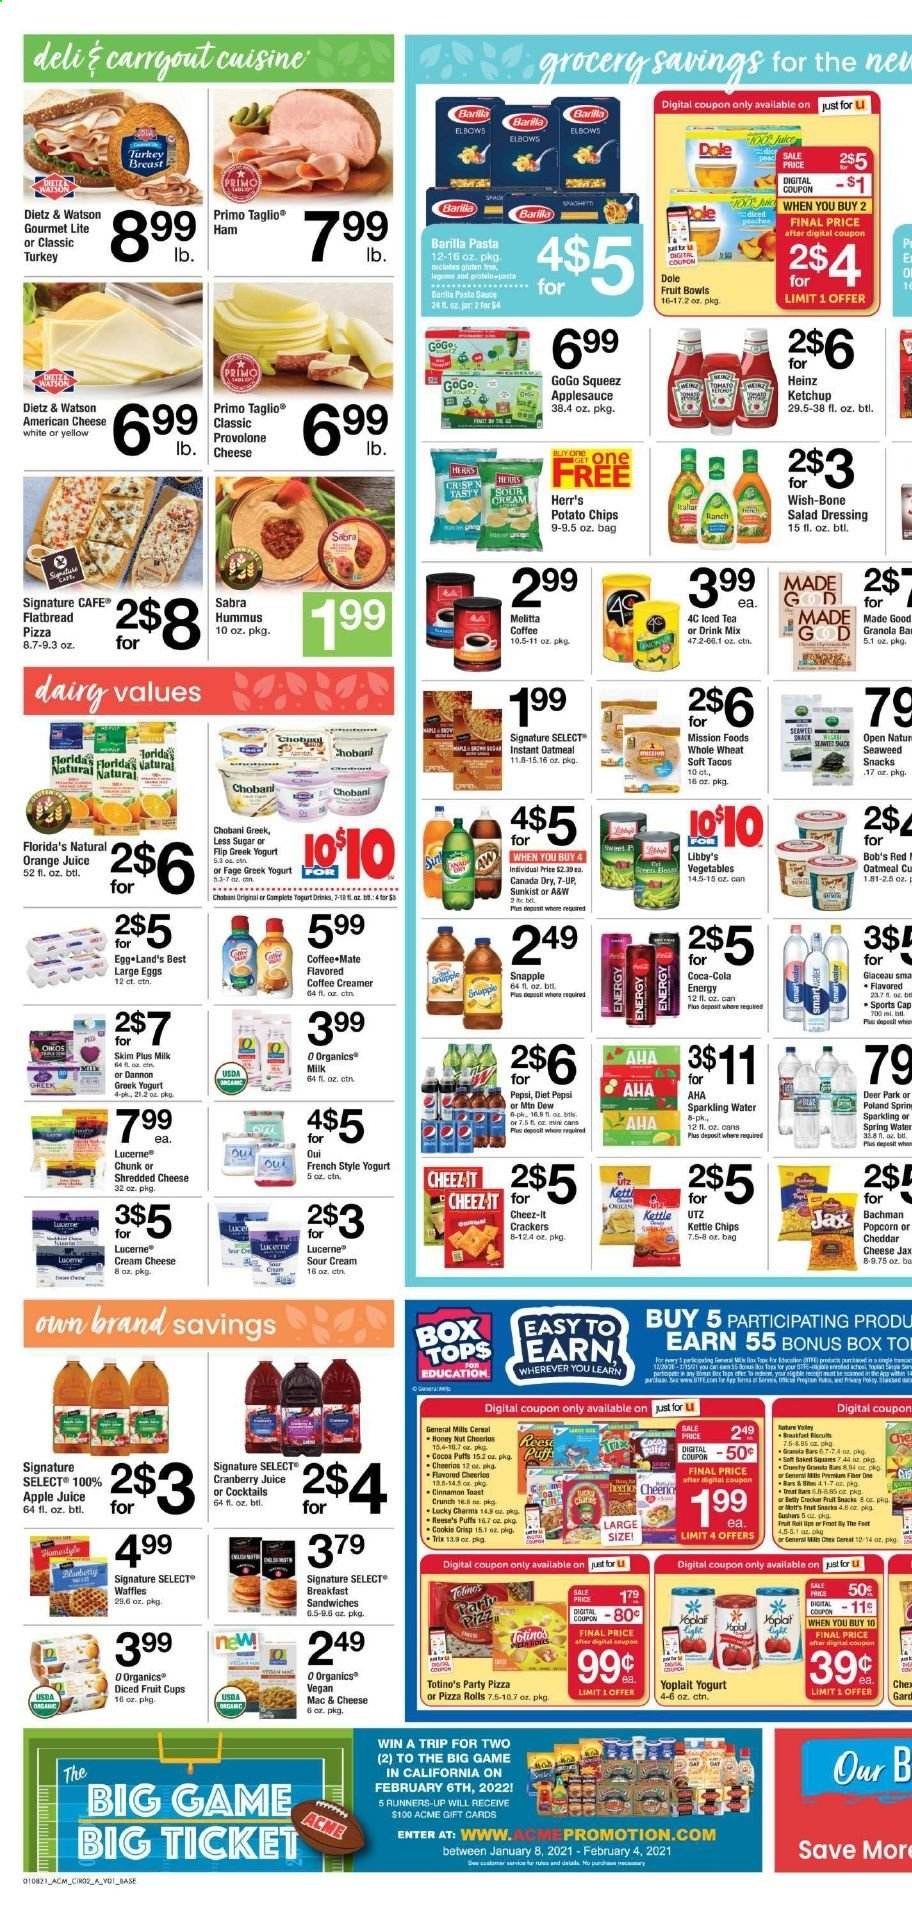 thumbnail - ACME Flyer - 01/08/2021 - 01/14/2021 - Sales products - fruit cup, Dole, pizza rolls, toast bread, flatbread, tacos, puffs, waffles, cream cheese, macaroni & cheese, pizza, sauce, Barilla, ham, Dietz & Watson, hummus, american cheese, shredded cheese, greek yoghurt, yoghurt, Yoplait, Chobani, Dannon, Coffee-Mate, yoghurt drink, large eggs, sour cream, creamer, coffee and tea creamer, Reese's, crackers, Florida's Natural, potato chips, chips, snack, Cheez-It, cocoa, oatmeal, Heinz, cereals, Cheerios, Trix, pasta, cinnamon, salad dressing, ketchup, dressing, apple sauce, apple juice, Canada Dry, cranberry juice, Mountain Dew, Pepsi, orange juice, juice, Diet Pepsi, 7UP, Snapple, A&W, Mott's, sparkling water, turkey breast, tops, bag. Page 2.